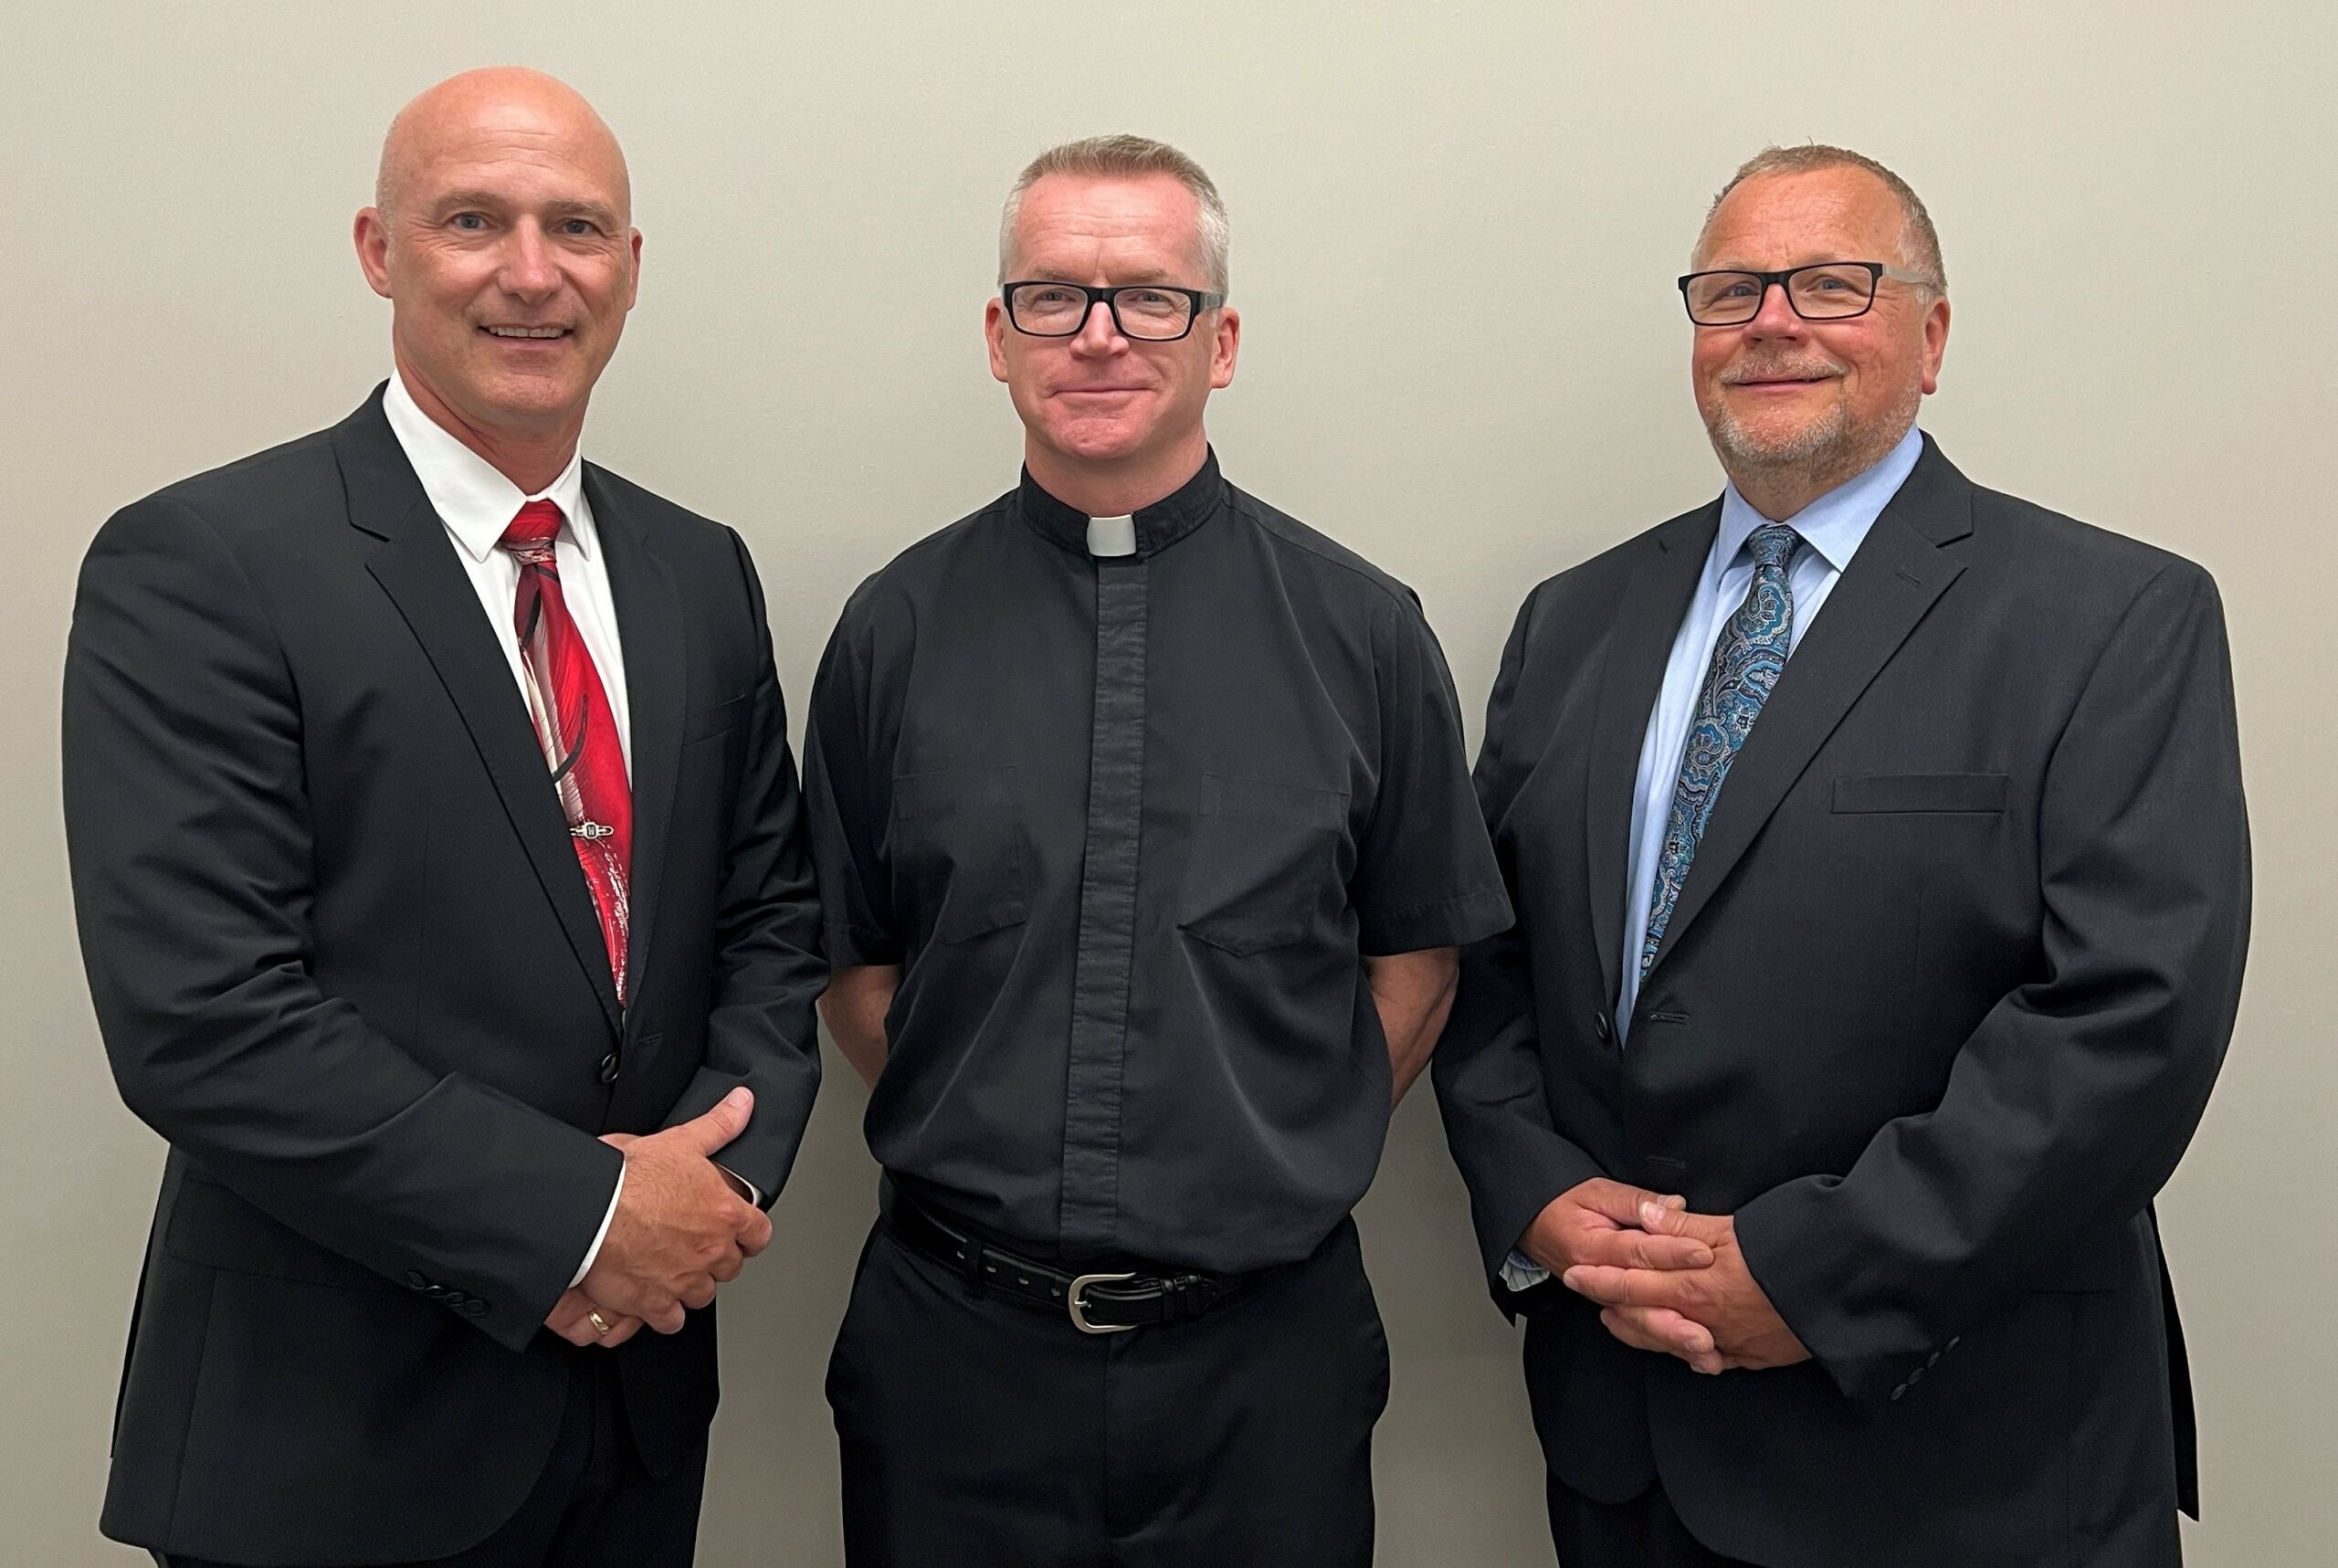 Father Chris Gillespie Appointed Board Chaplain